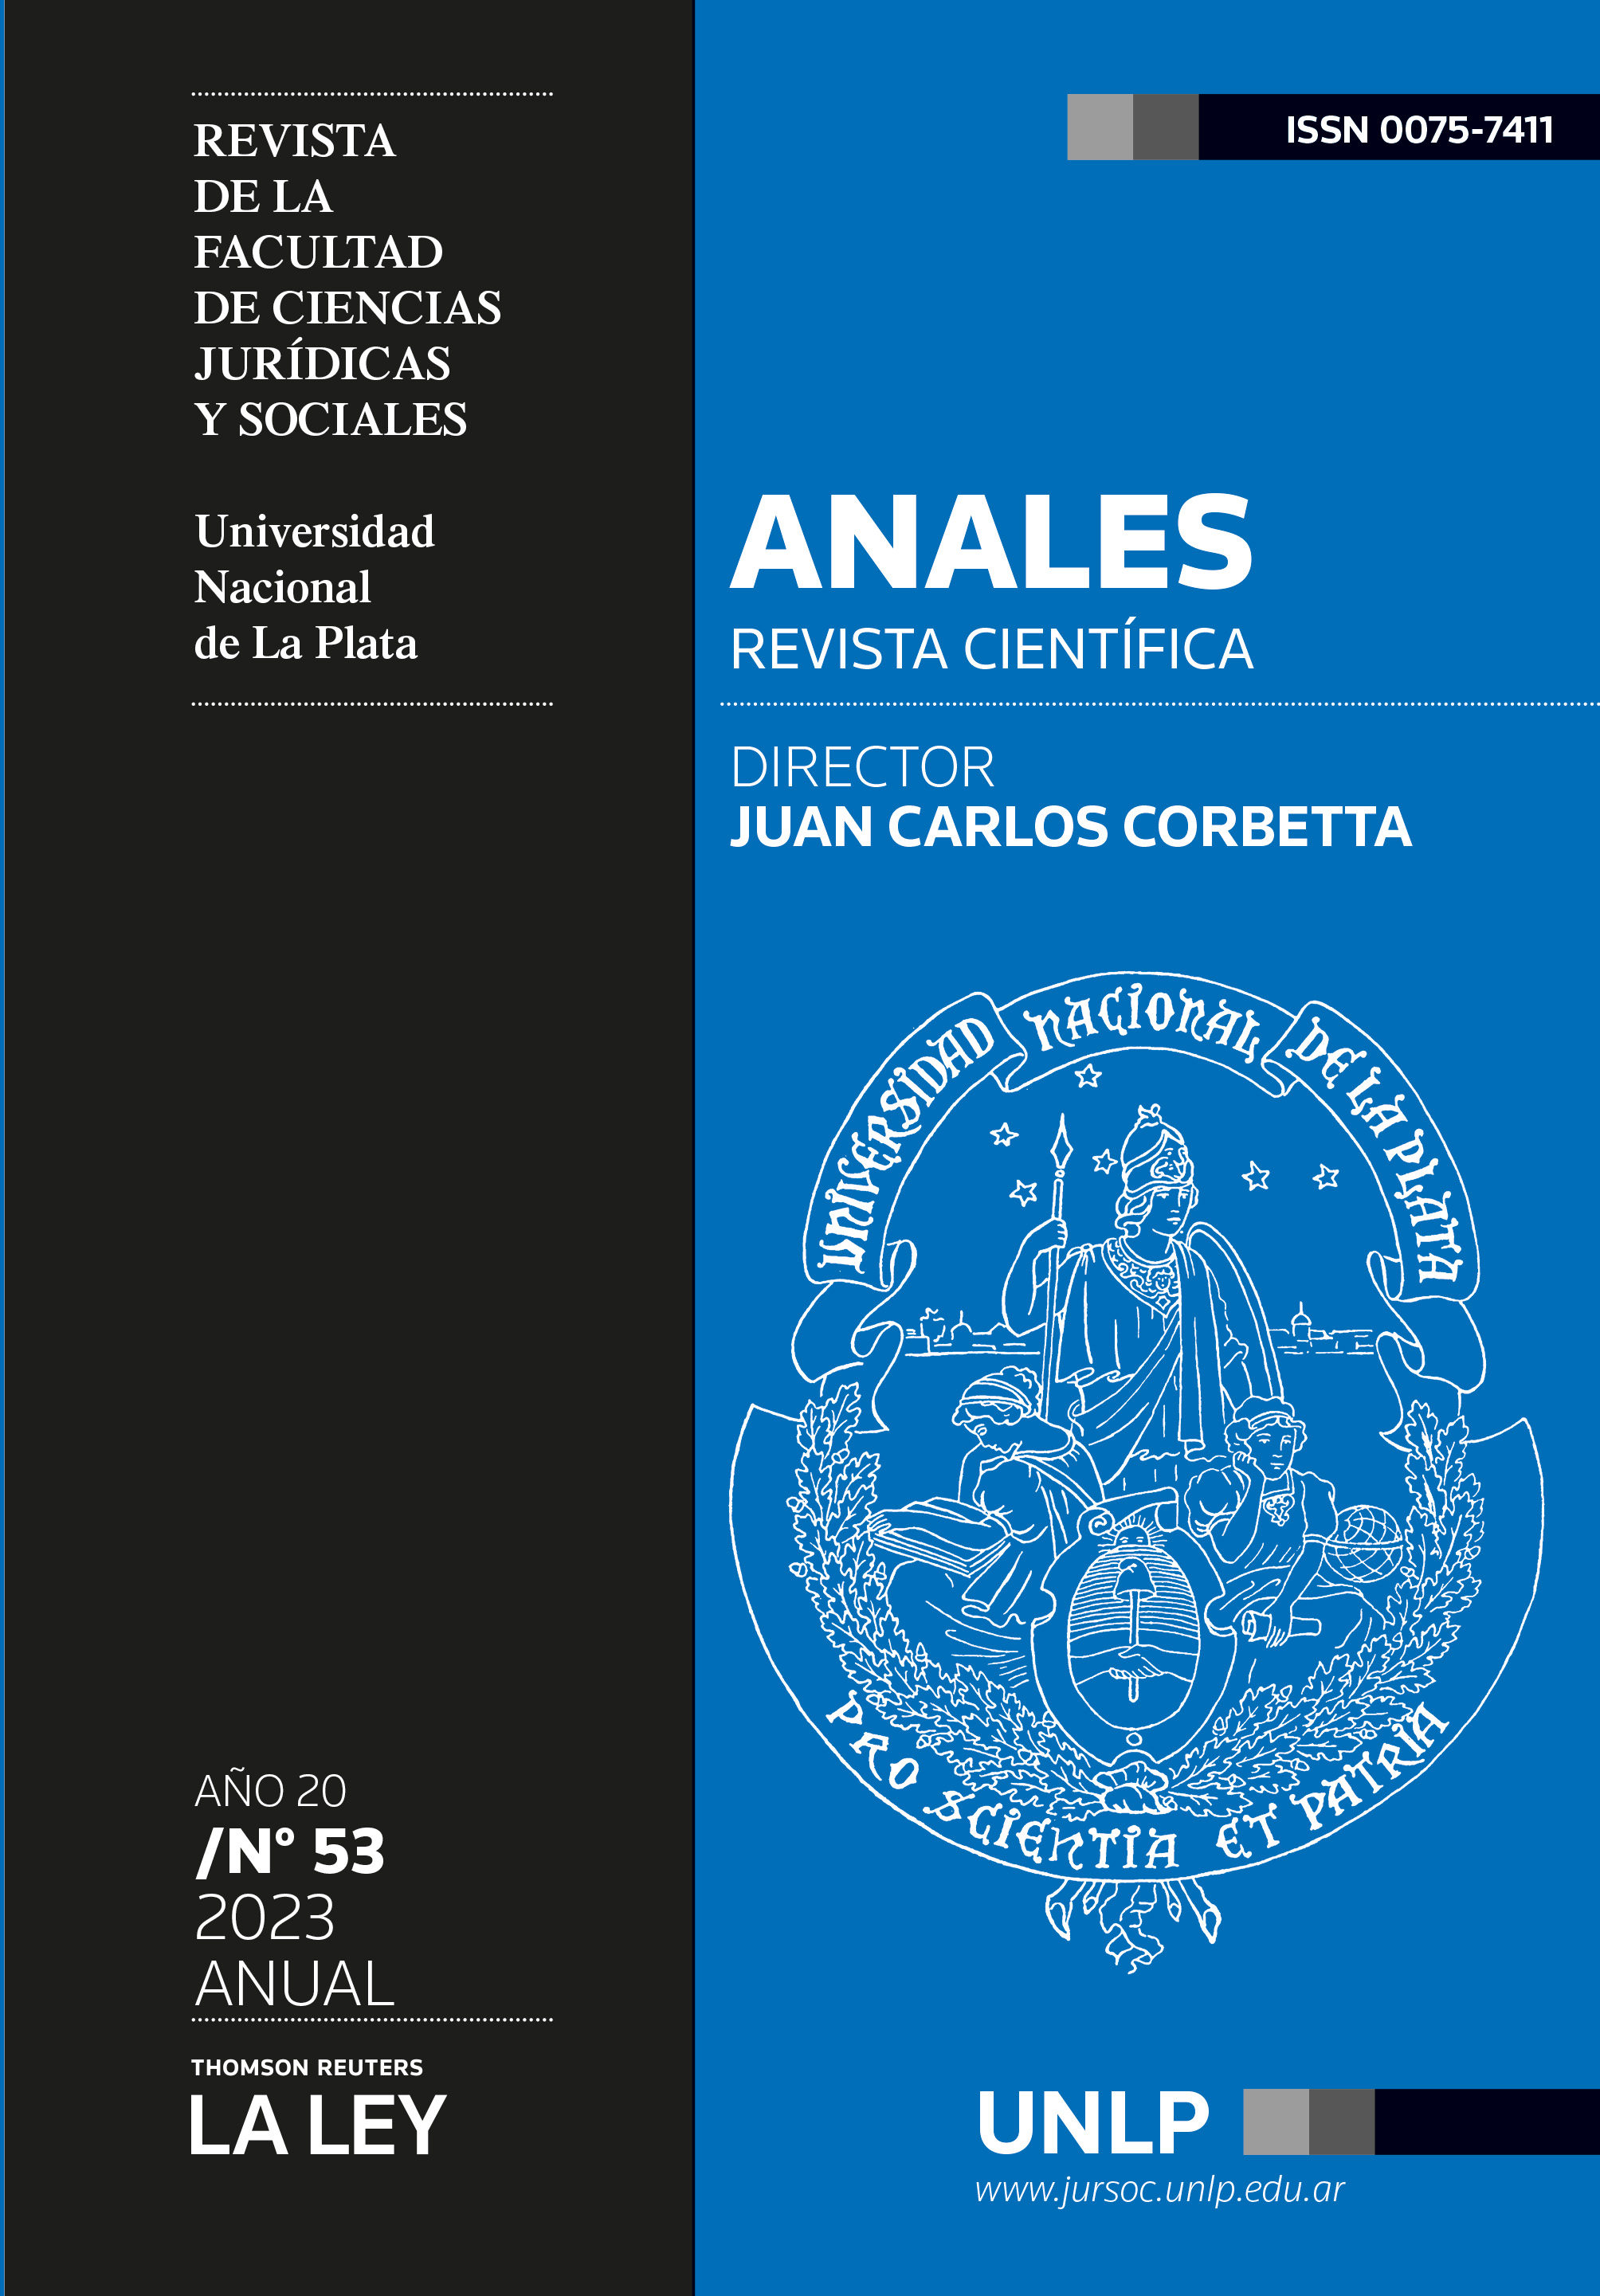 					View No. 53 (2023): Anales
				